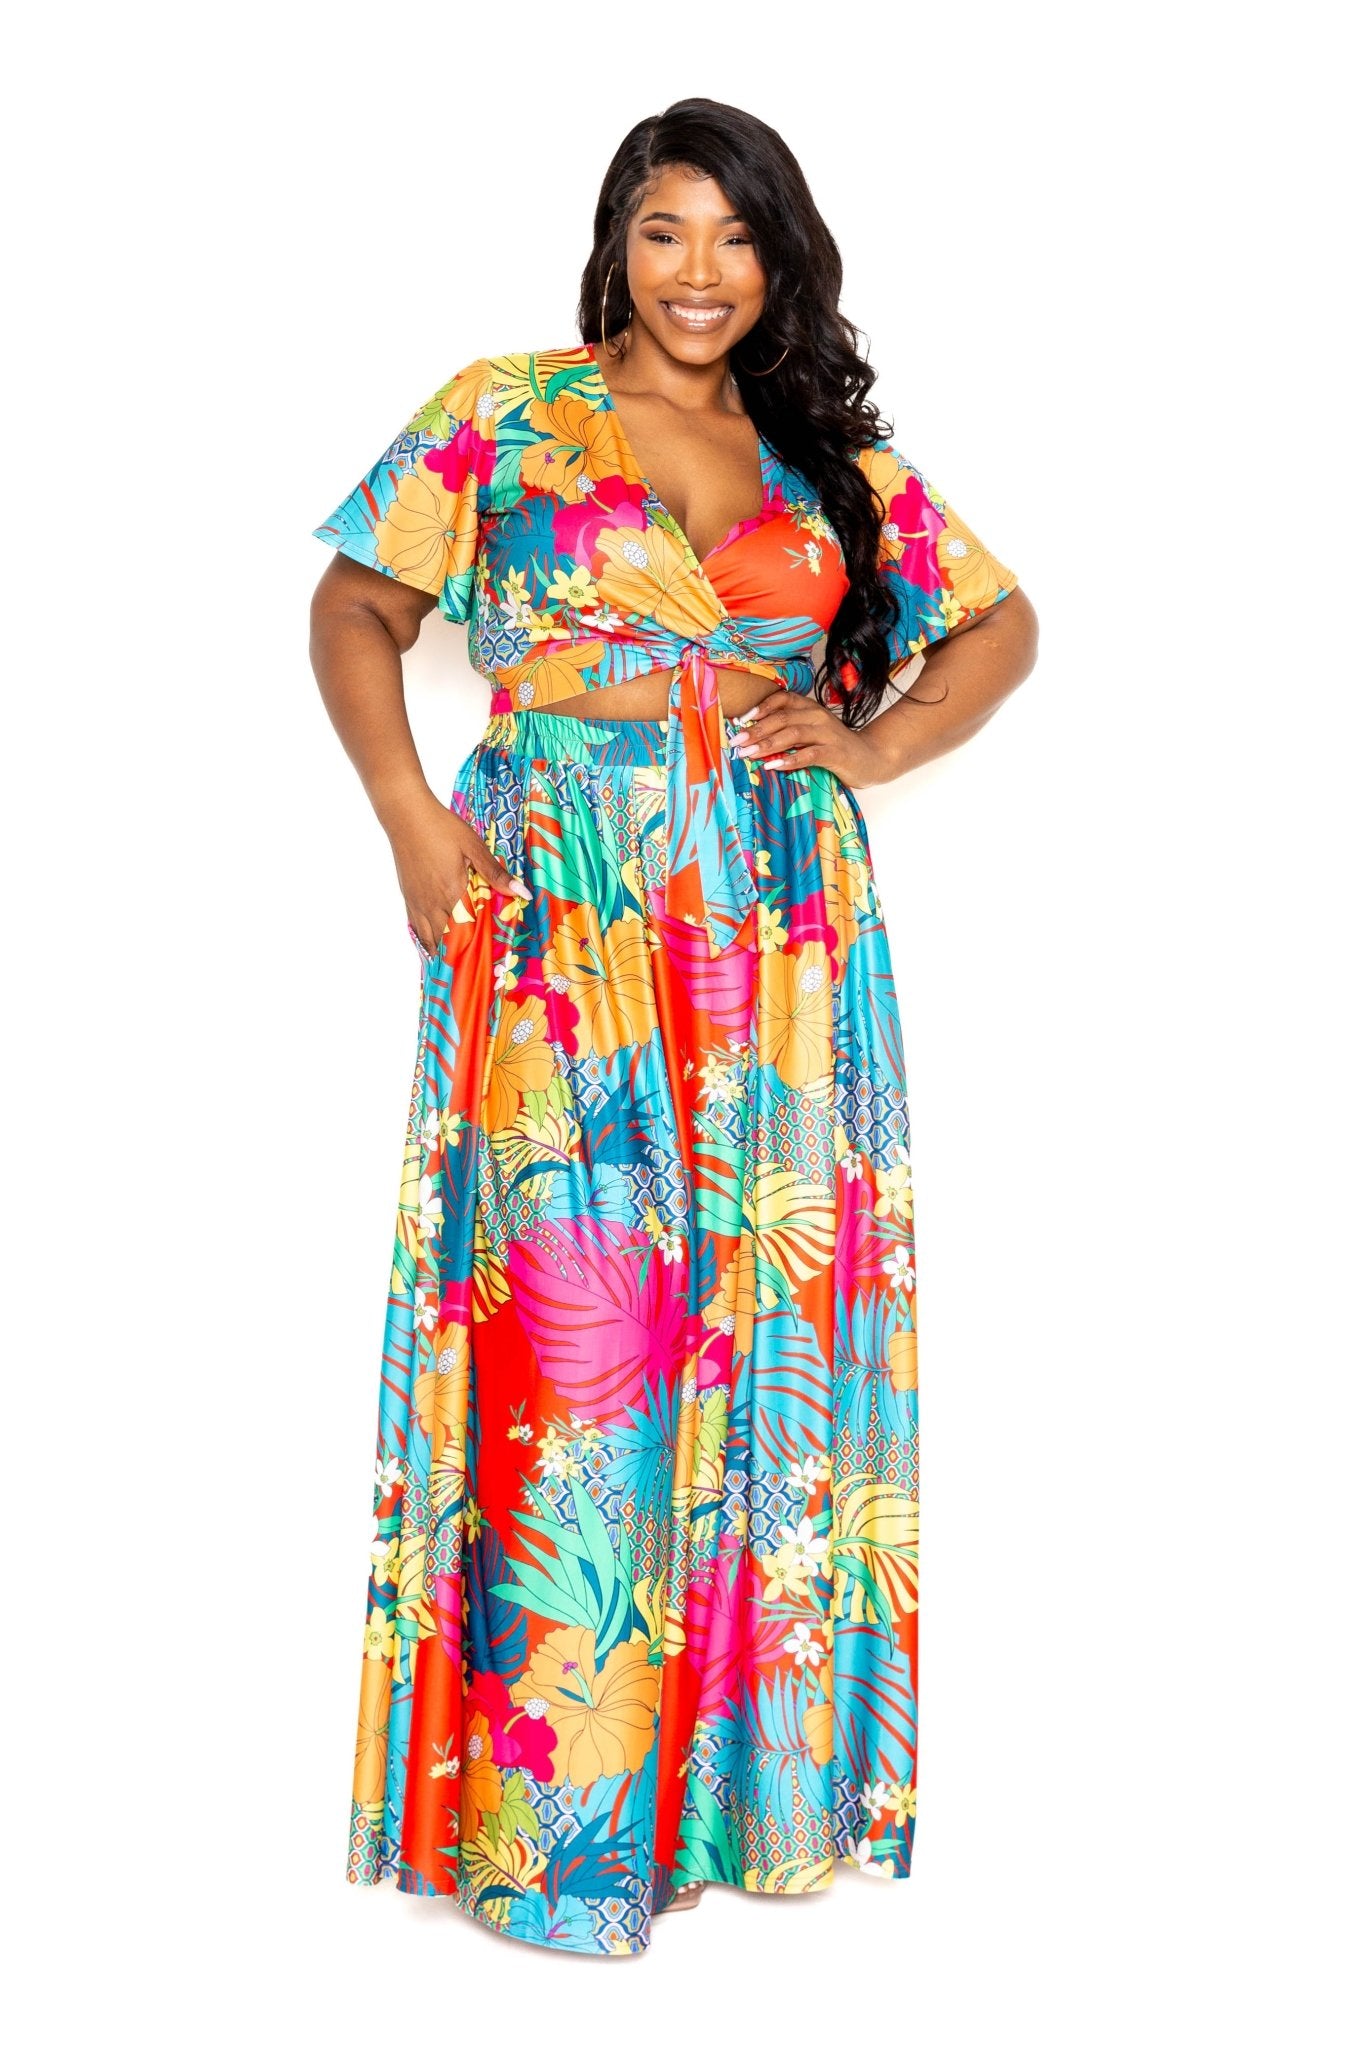 Tropical floral maxi skirt & top set - Love It Clothing